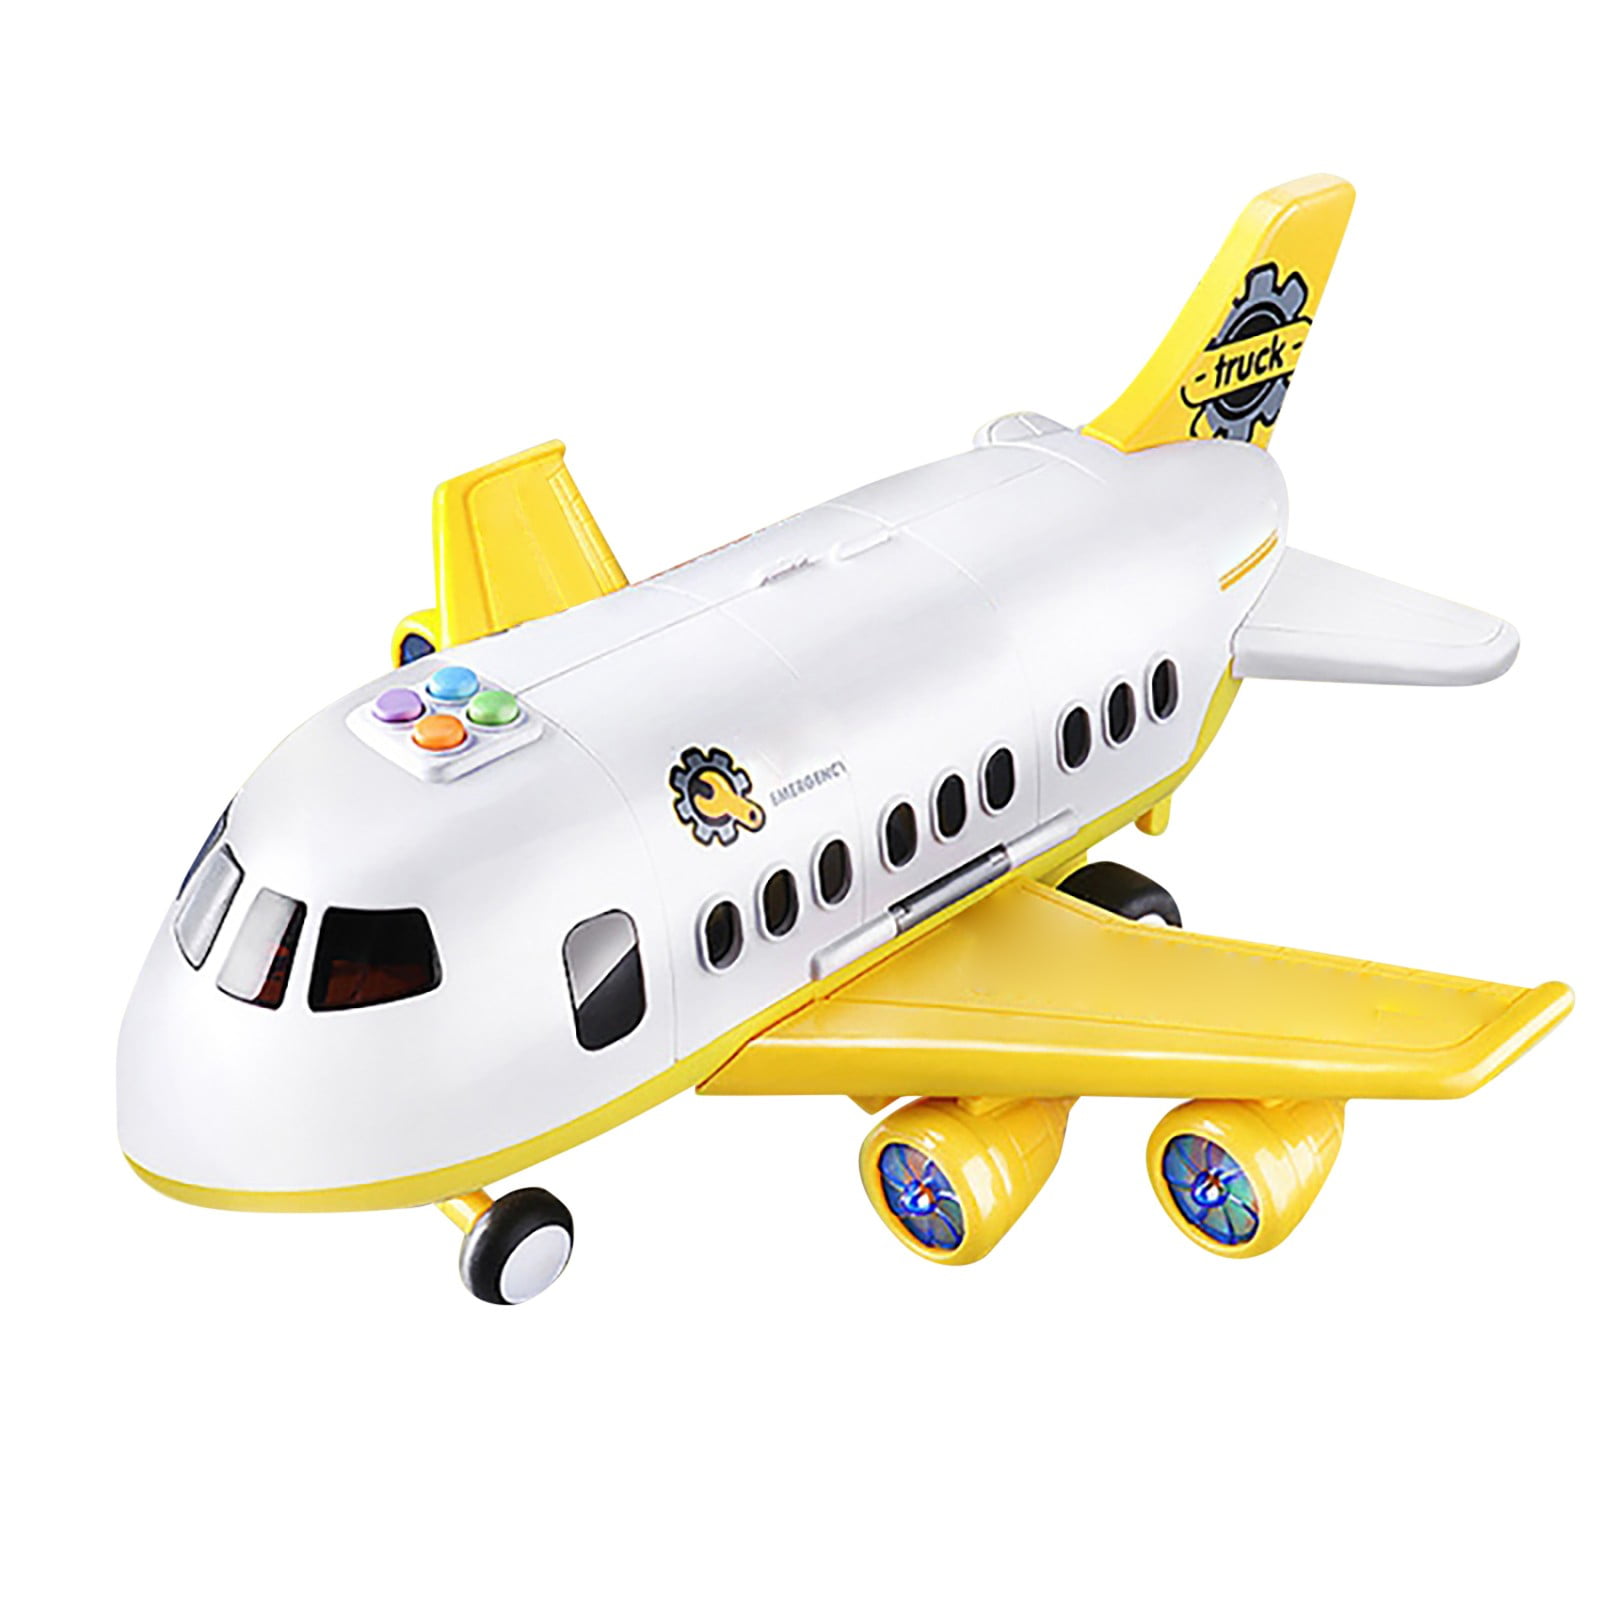 Airplane Car Toys Set Transport Cargo Aircraft With Fire truck Vehicles DIY Gift 